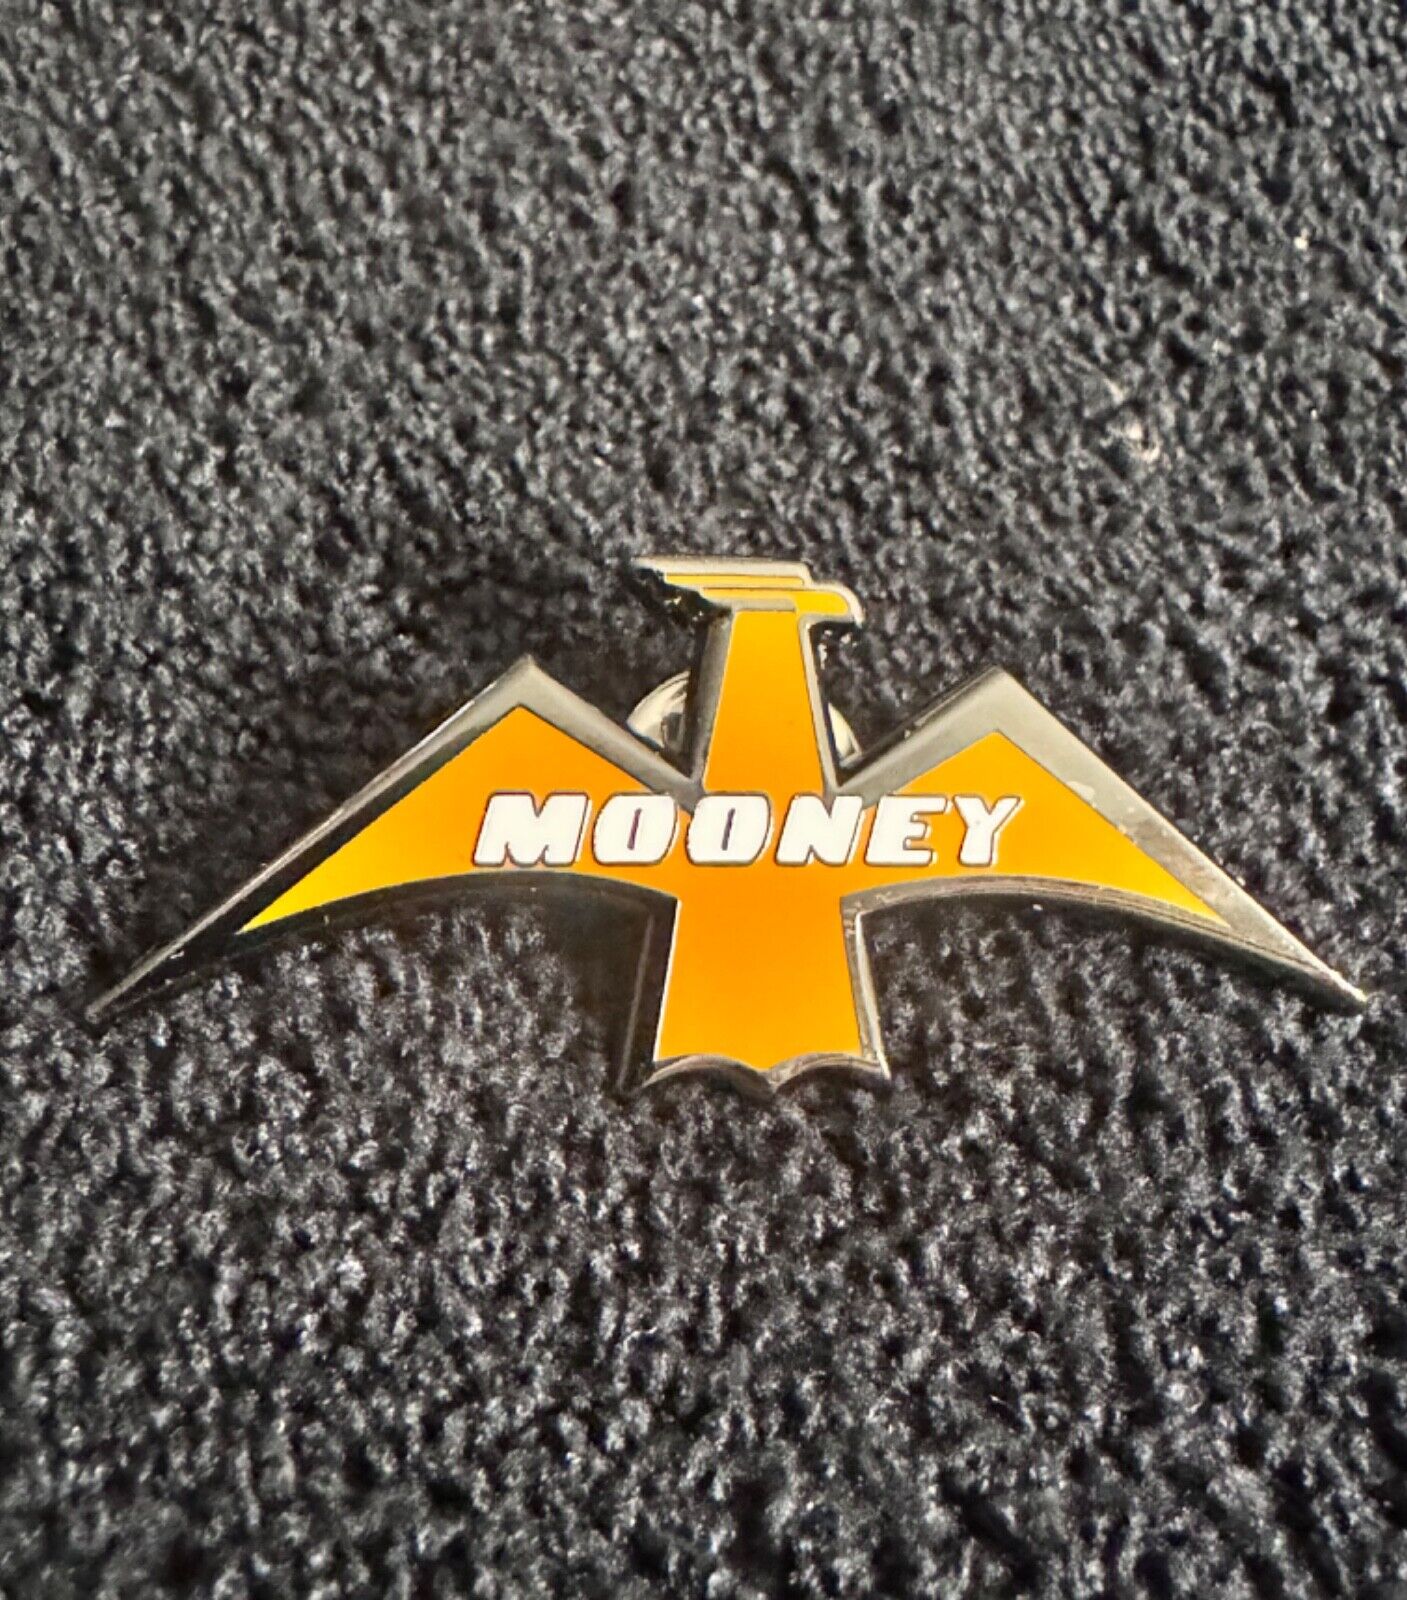 Mooney aircraft logo lapel pin for hats , shirts , vests or a gift - pilot plane